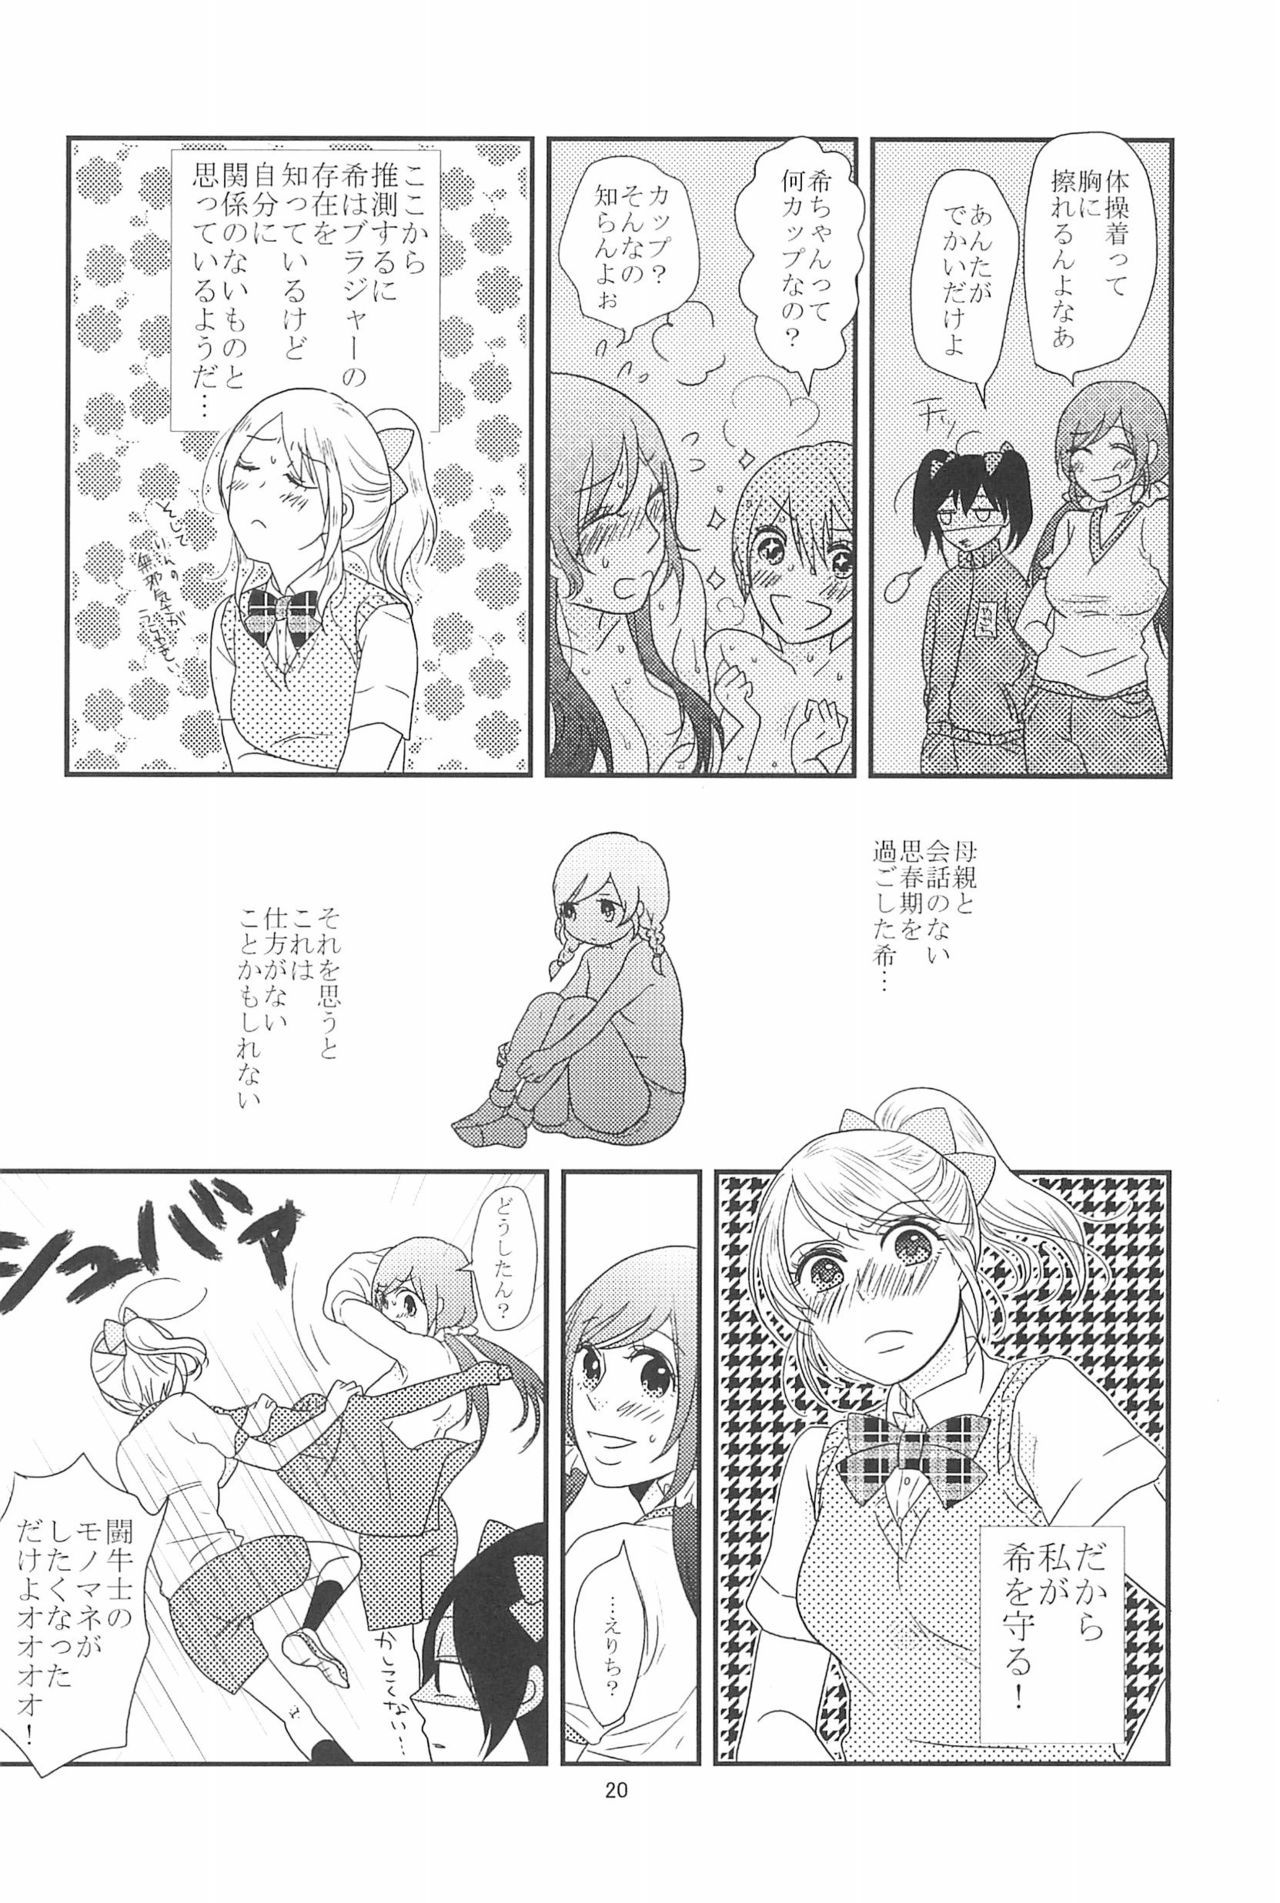 (C90) [BK*N2 (Mikawa Miso)] HAPPY GO LUCKY DAYS (Love Live!) page 24 full